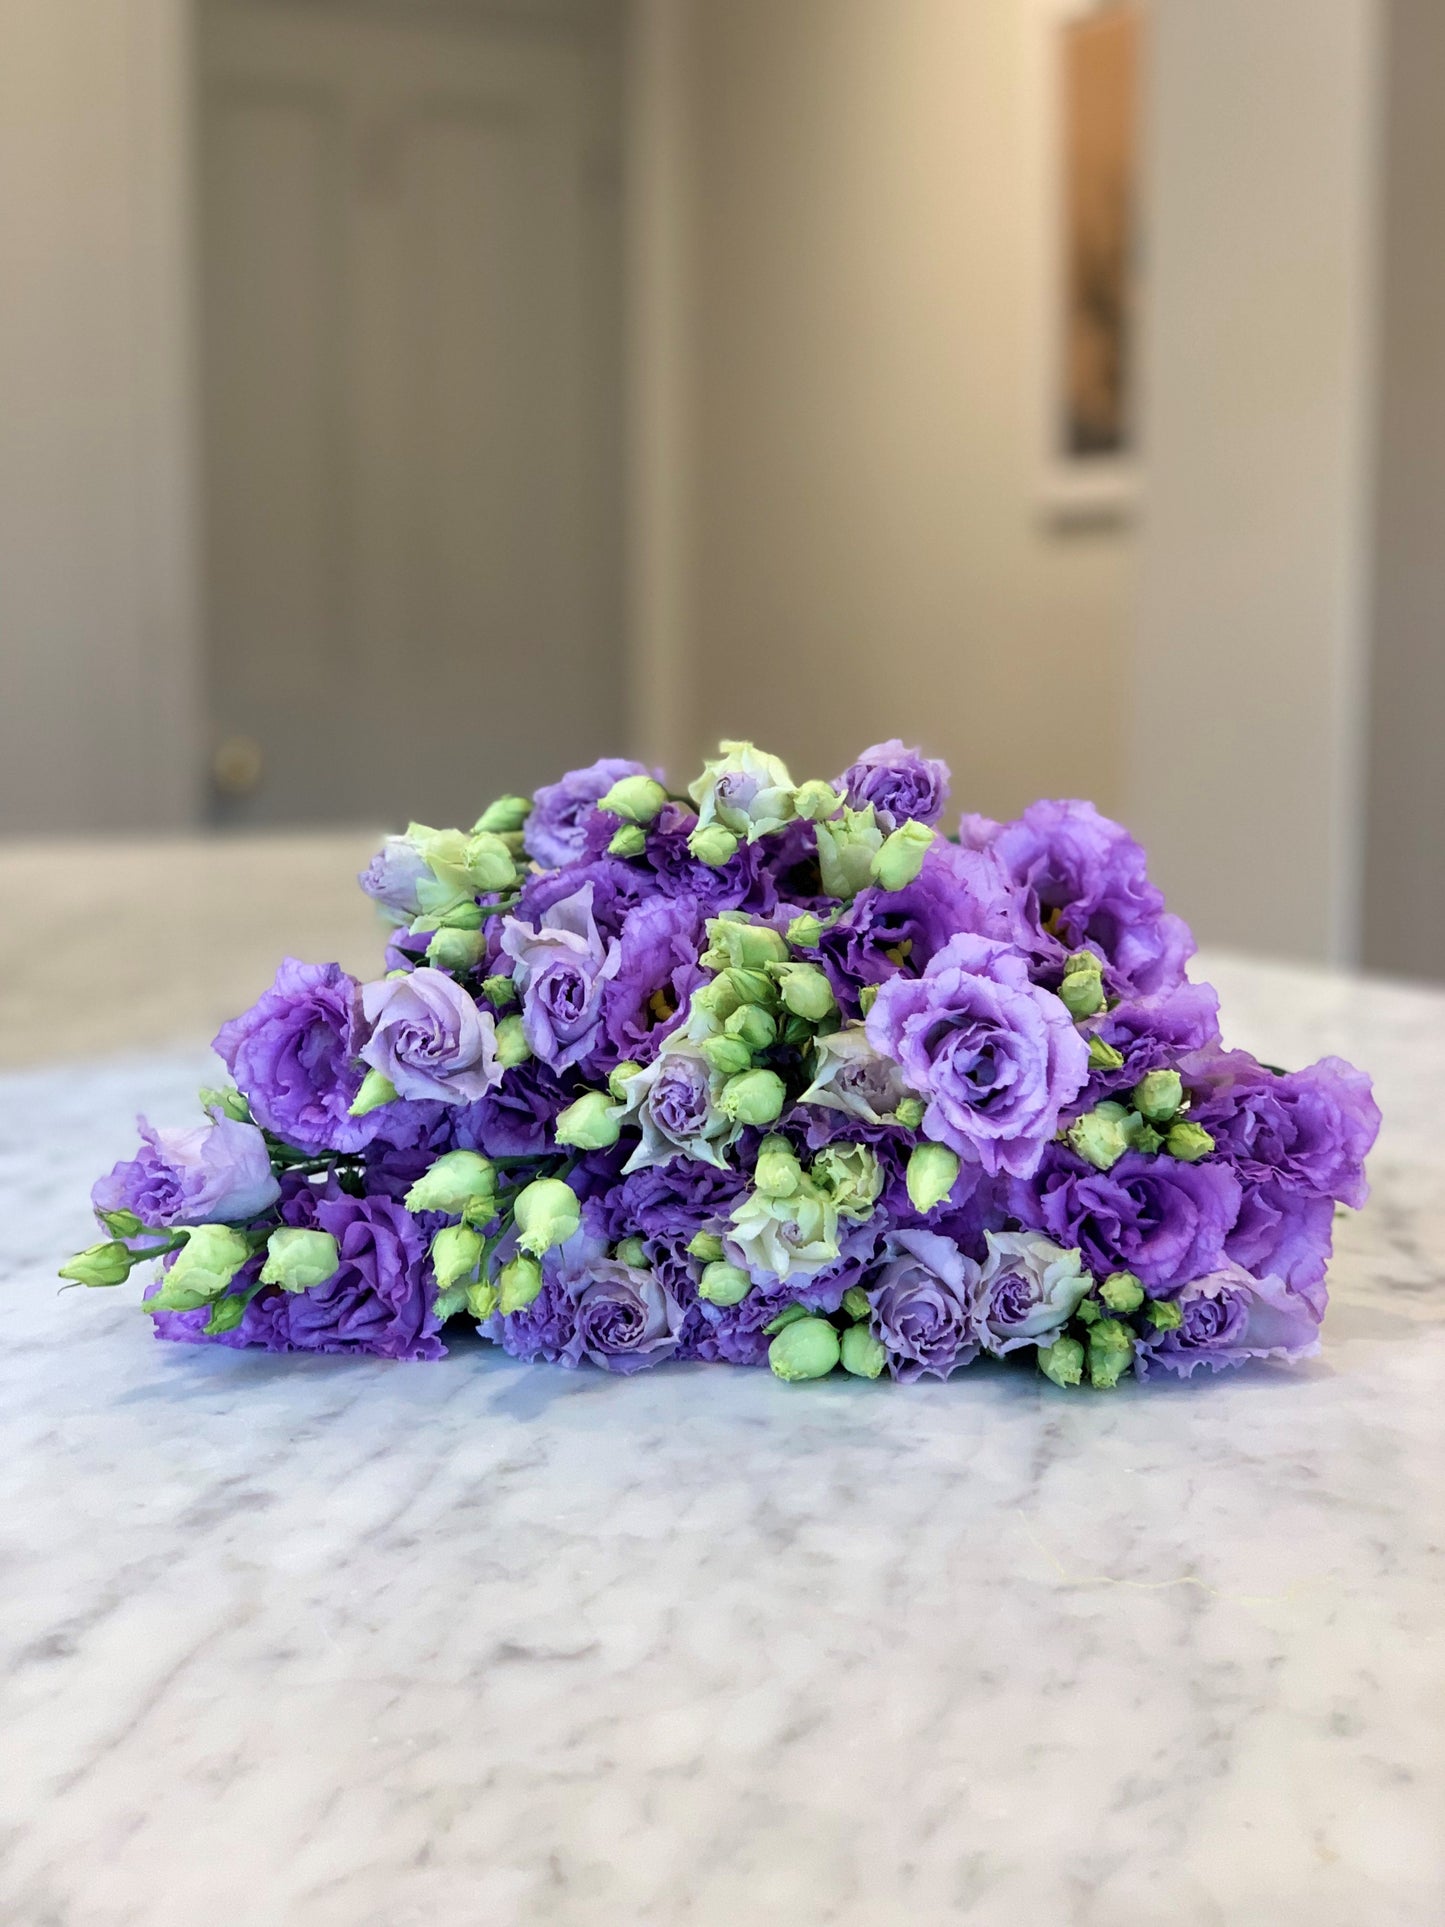 Lilac Frilly Lisianthus